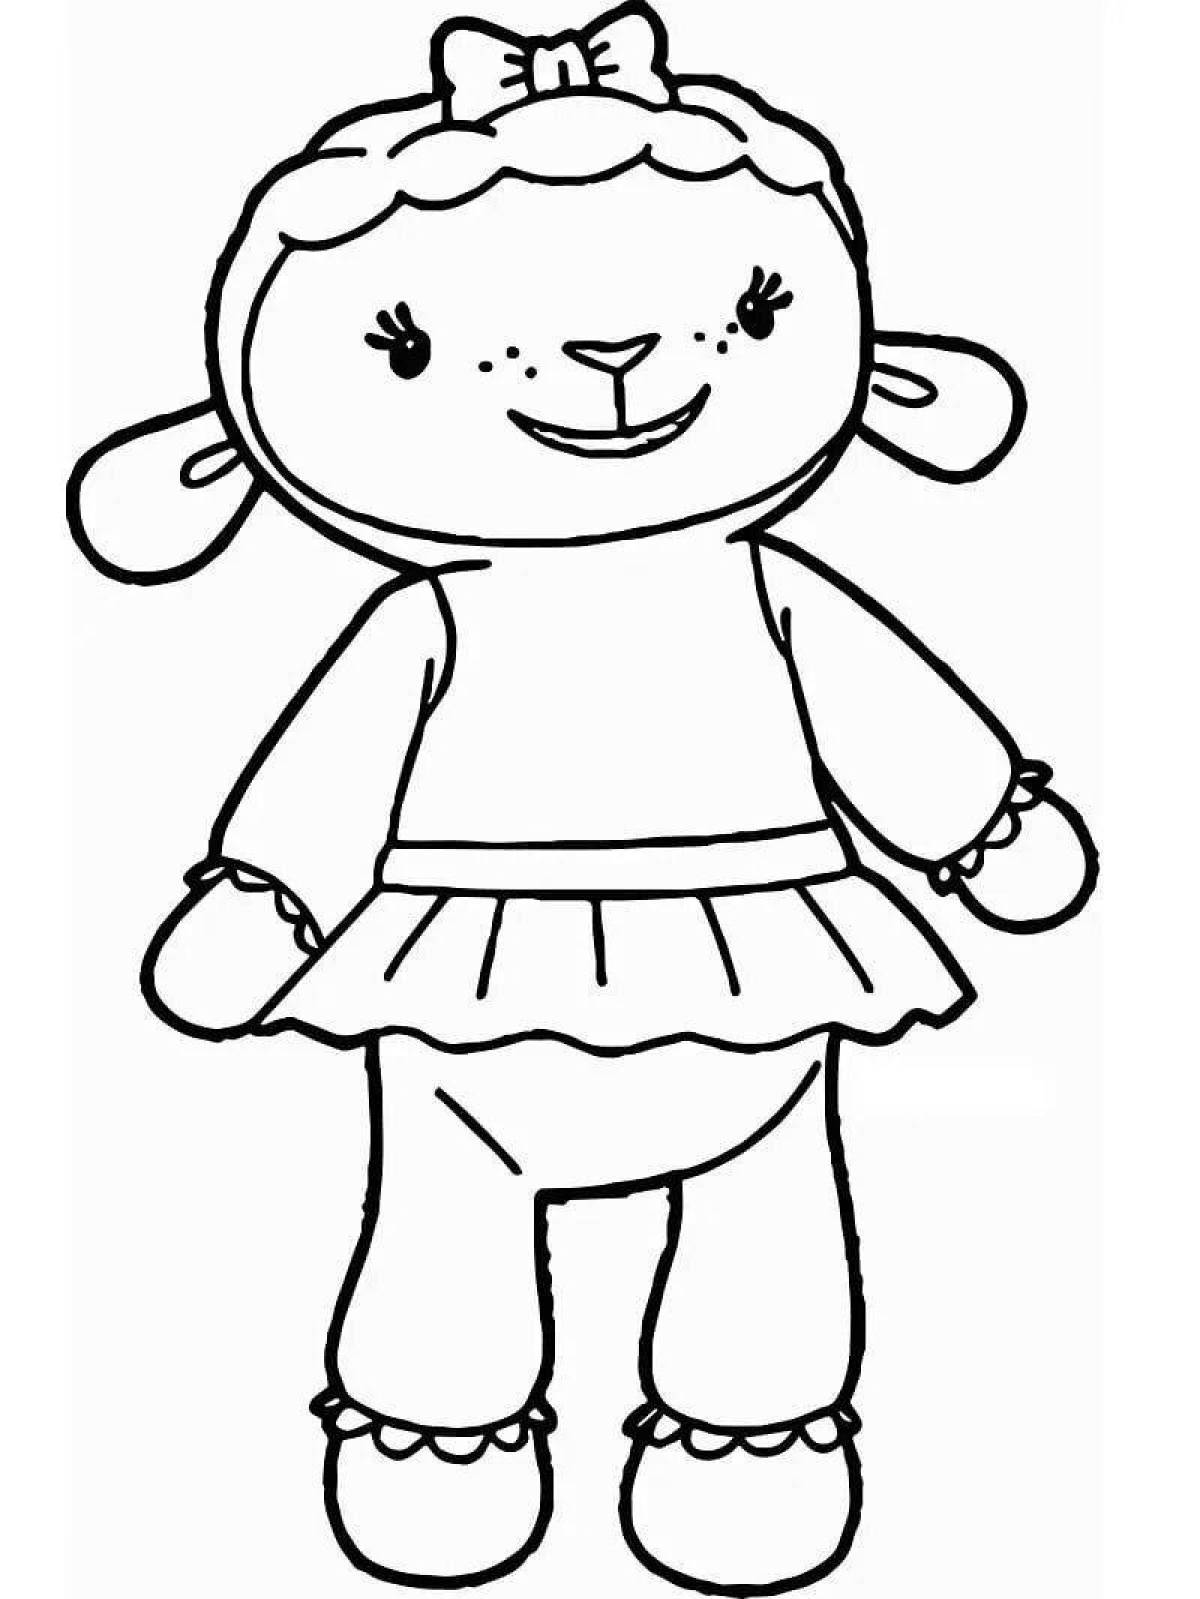 Susie the sheep coloring page